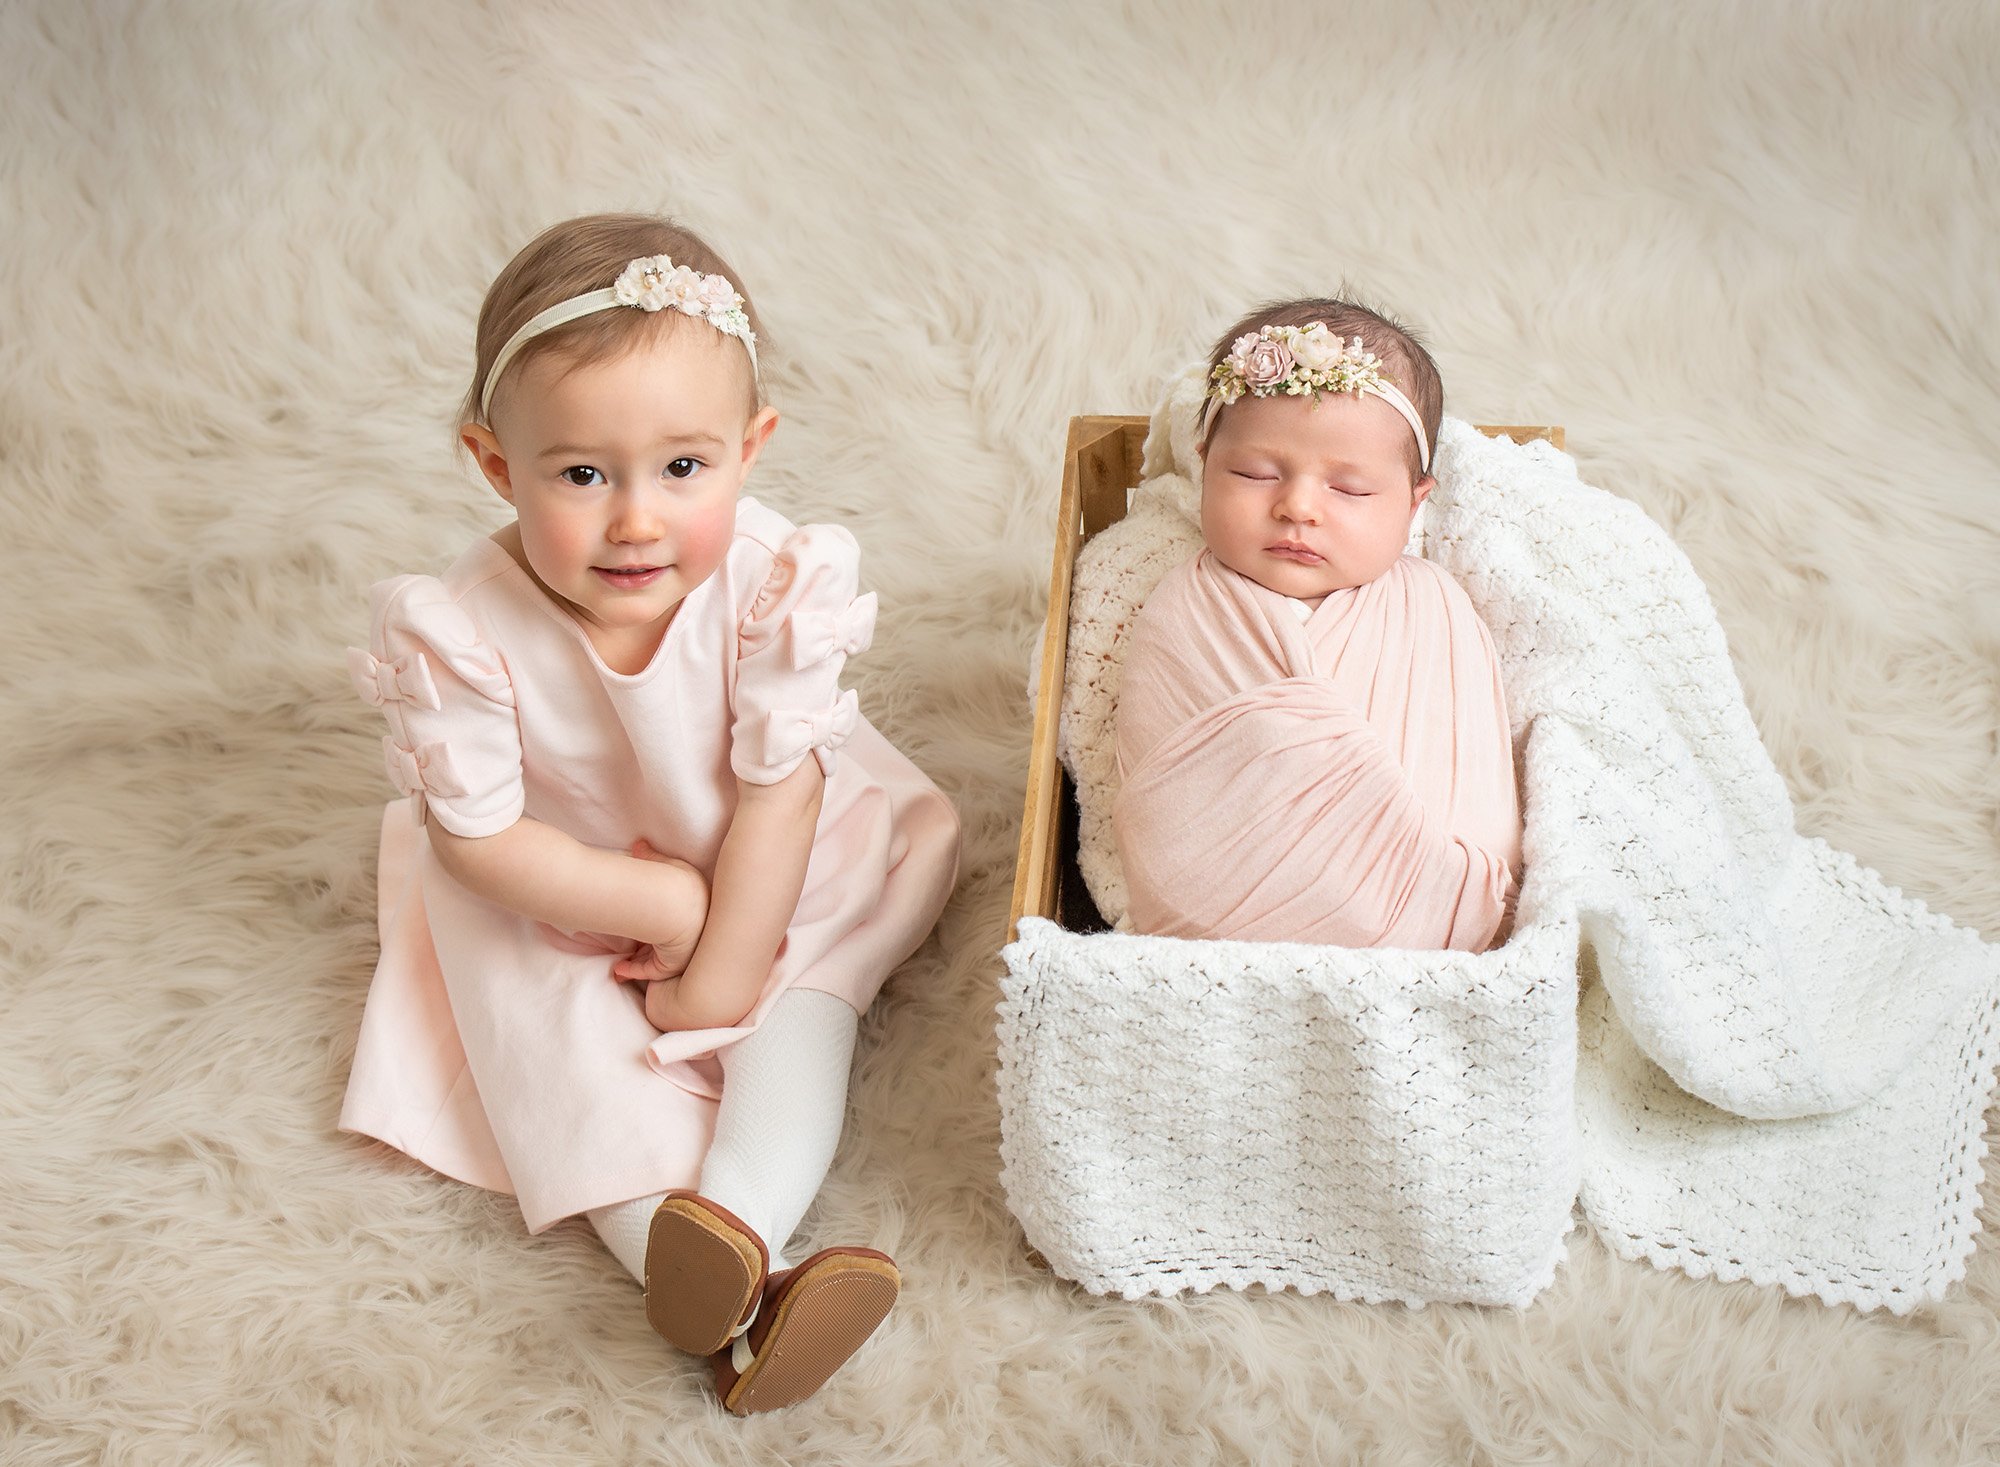 newborn baby swaddled in pink and floral headband laying in wooden box with white blanket next to lovely big sister in pink dress on fluffy blanket